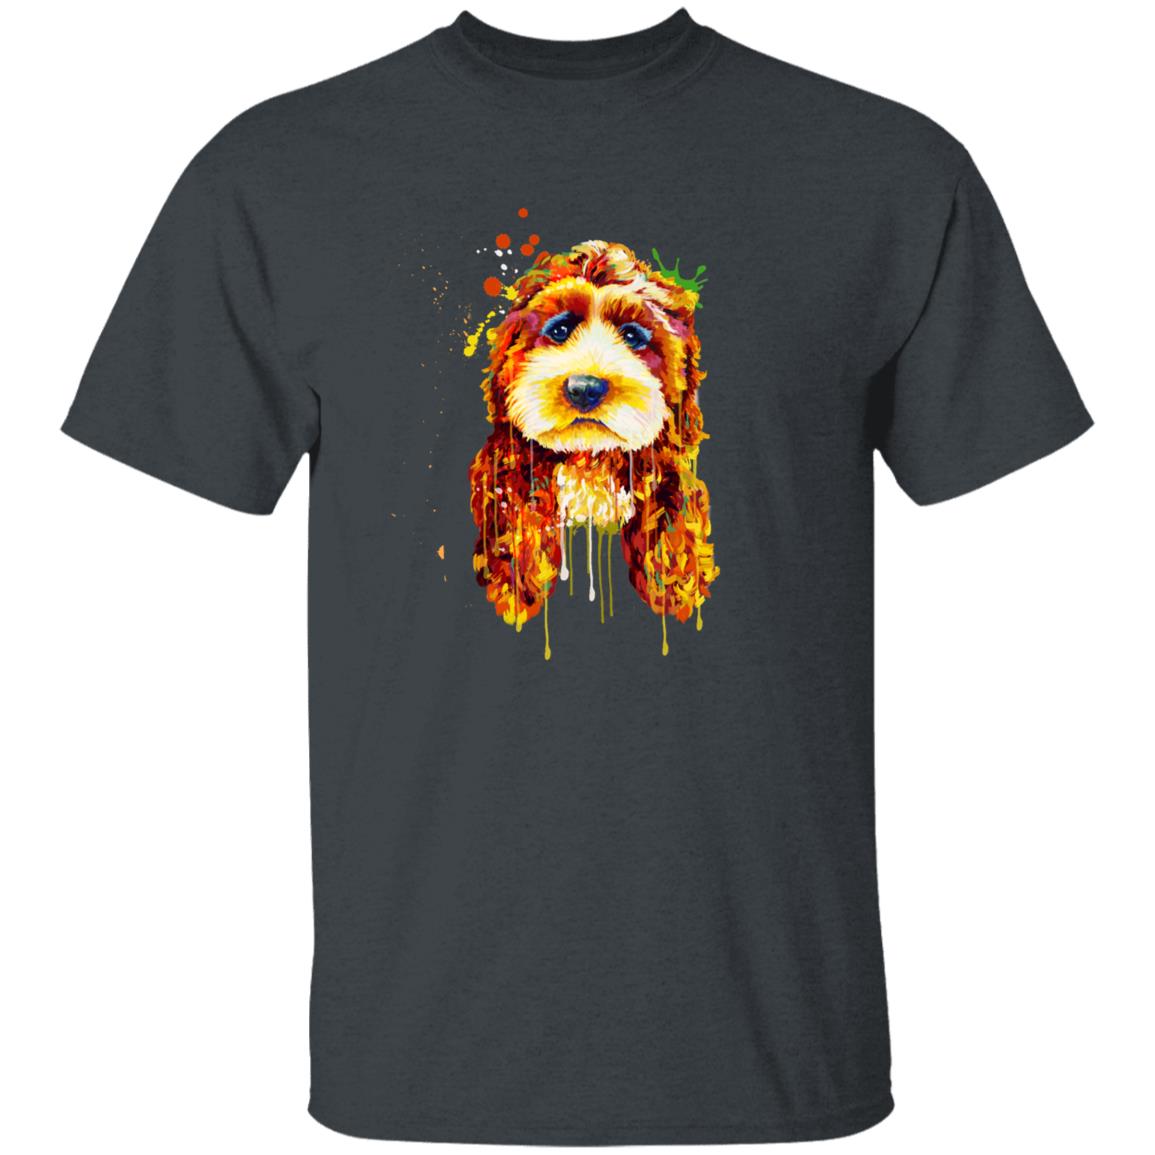 Watercolor painting Poodle dog Unisex shirt S-2XL black navy dark heather-Dark Heather-Family-Gift-Planet